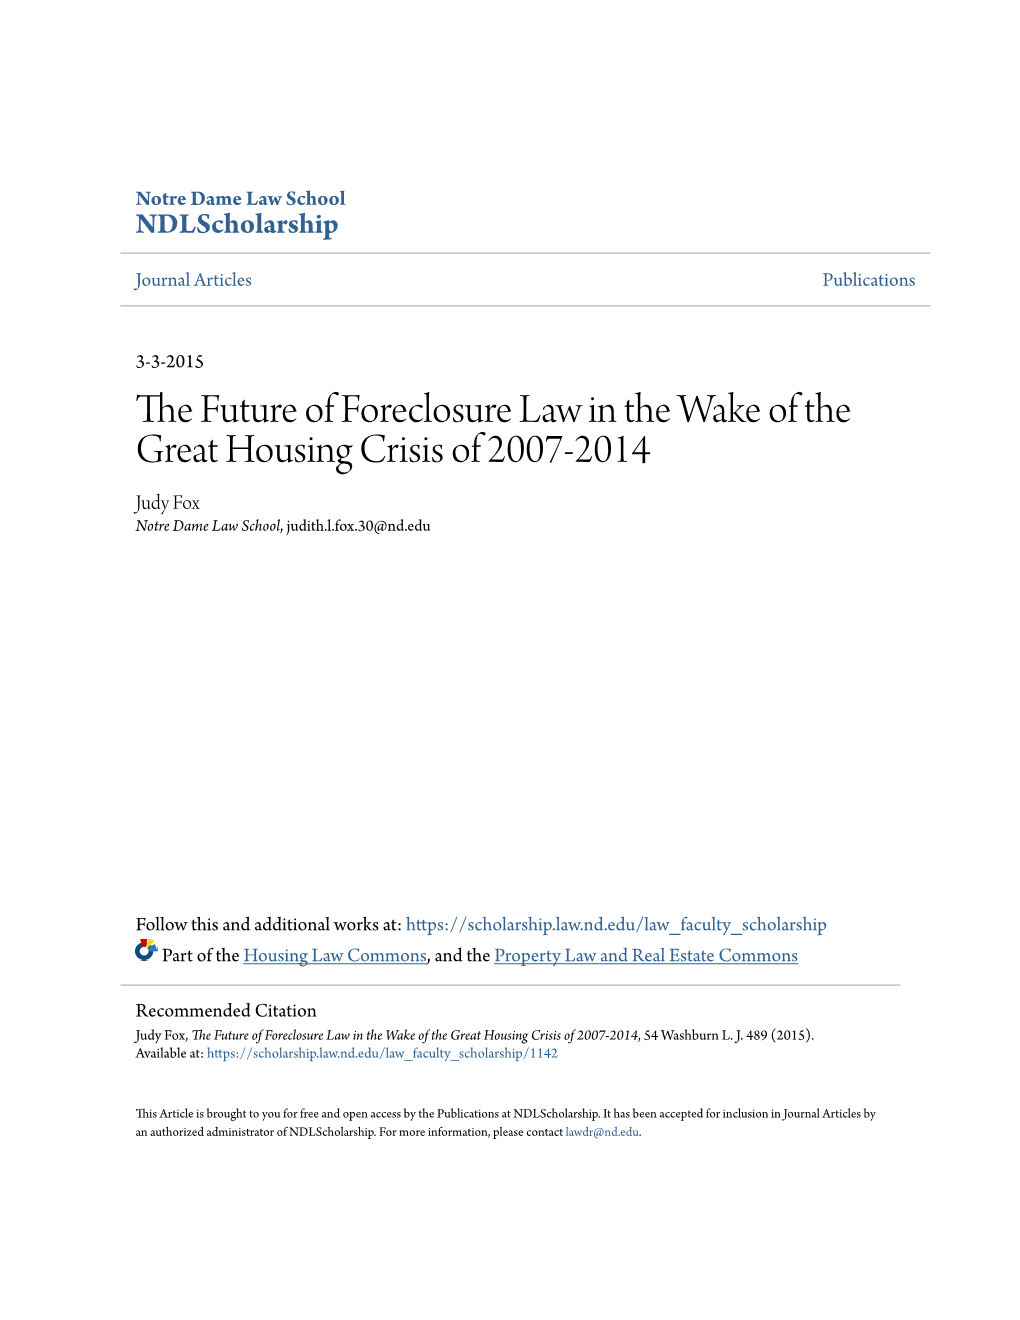 The Future of Foreclosure Law in the Wake of the Great Housing Crisis of 2007-2014, 54 Washburn L